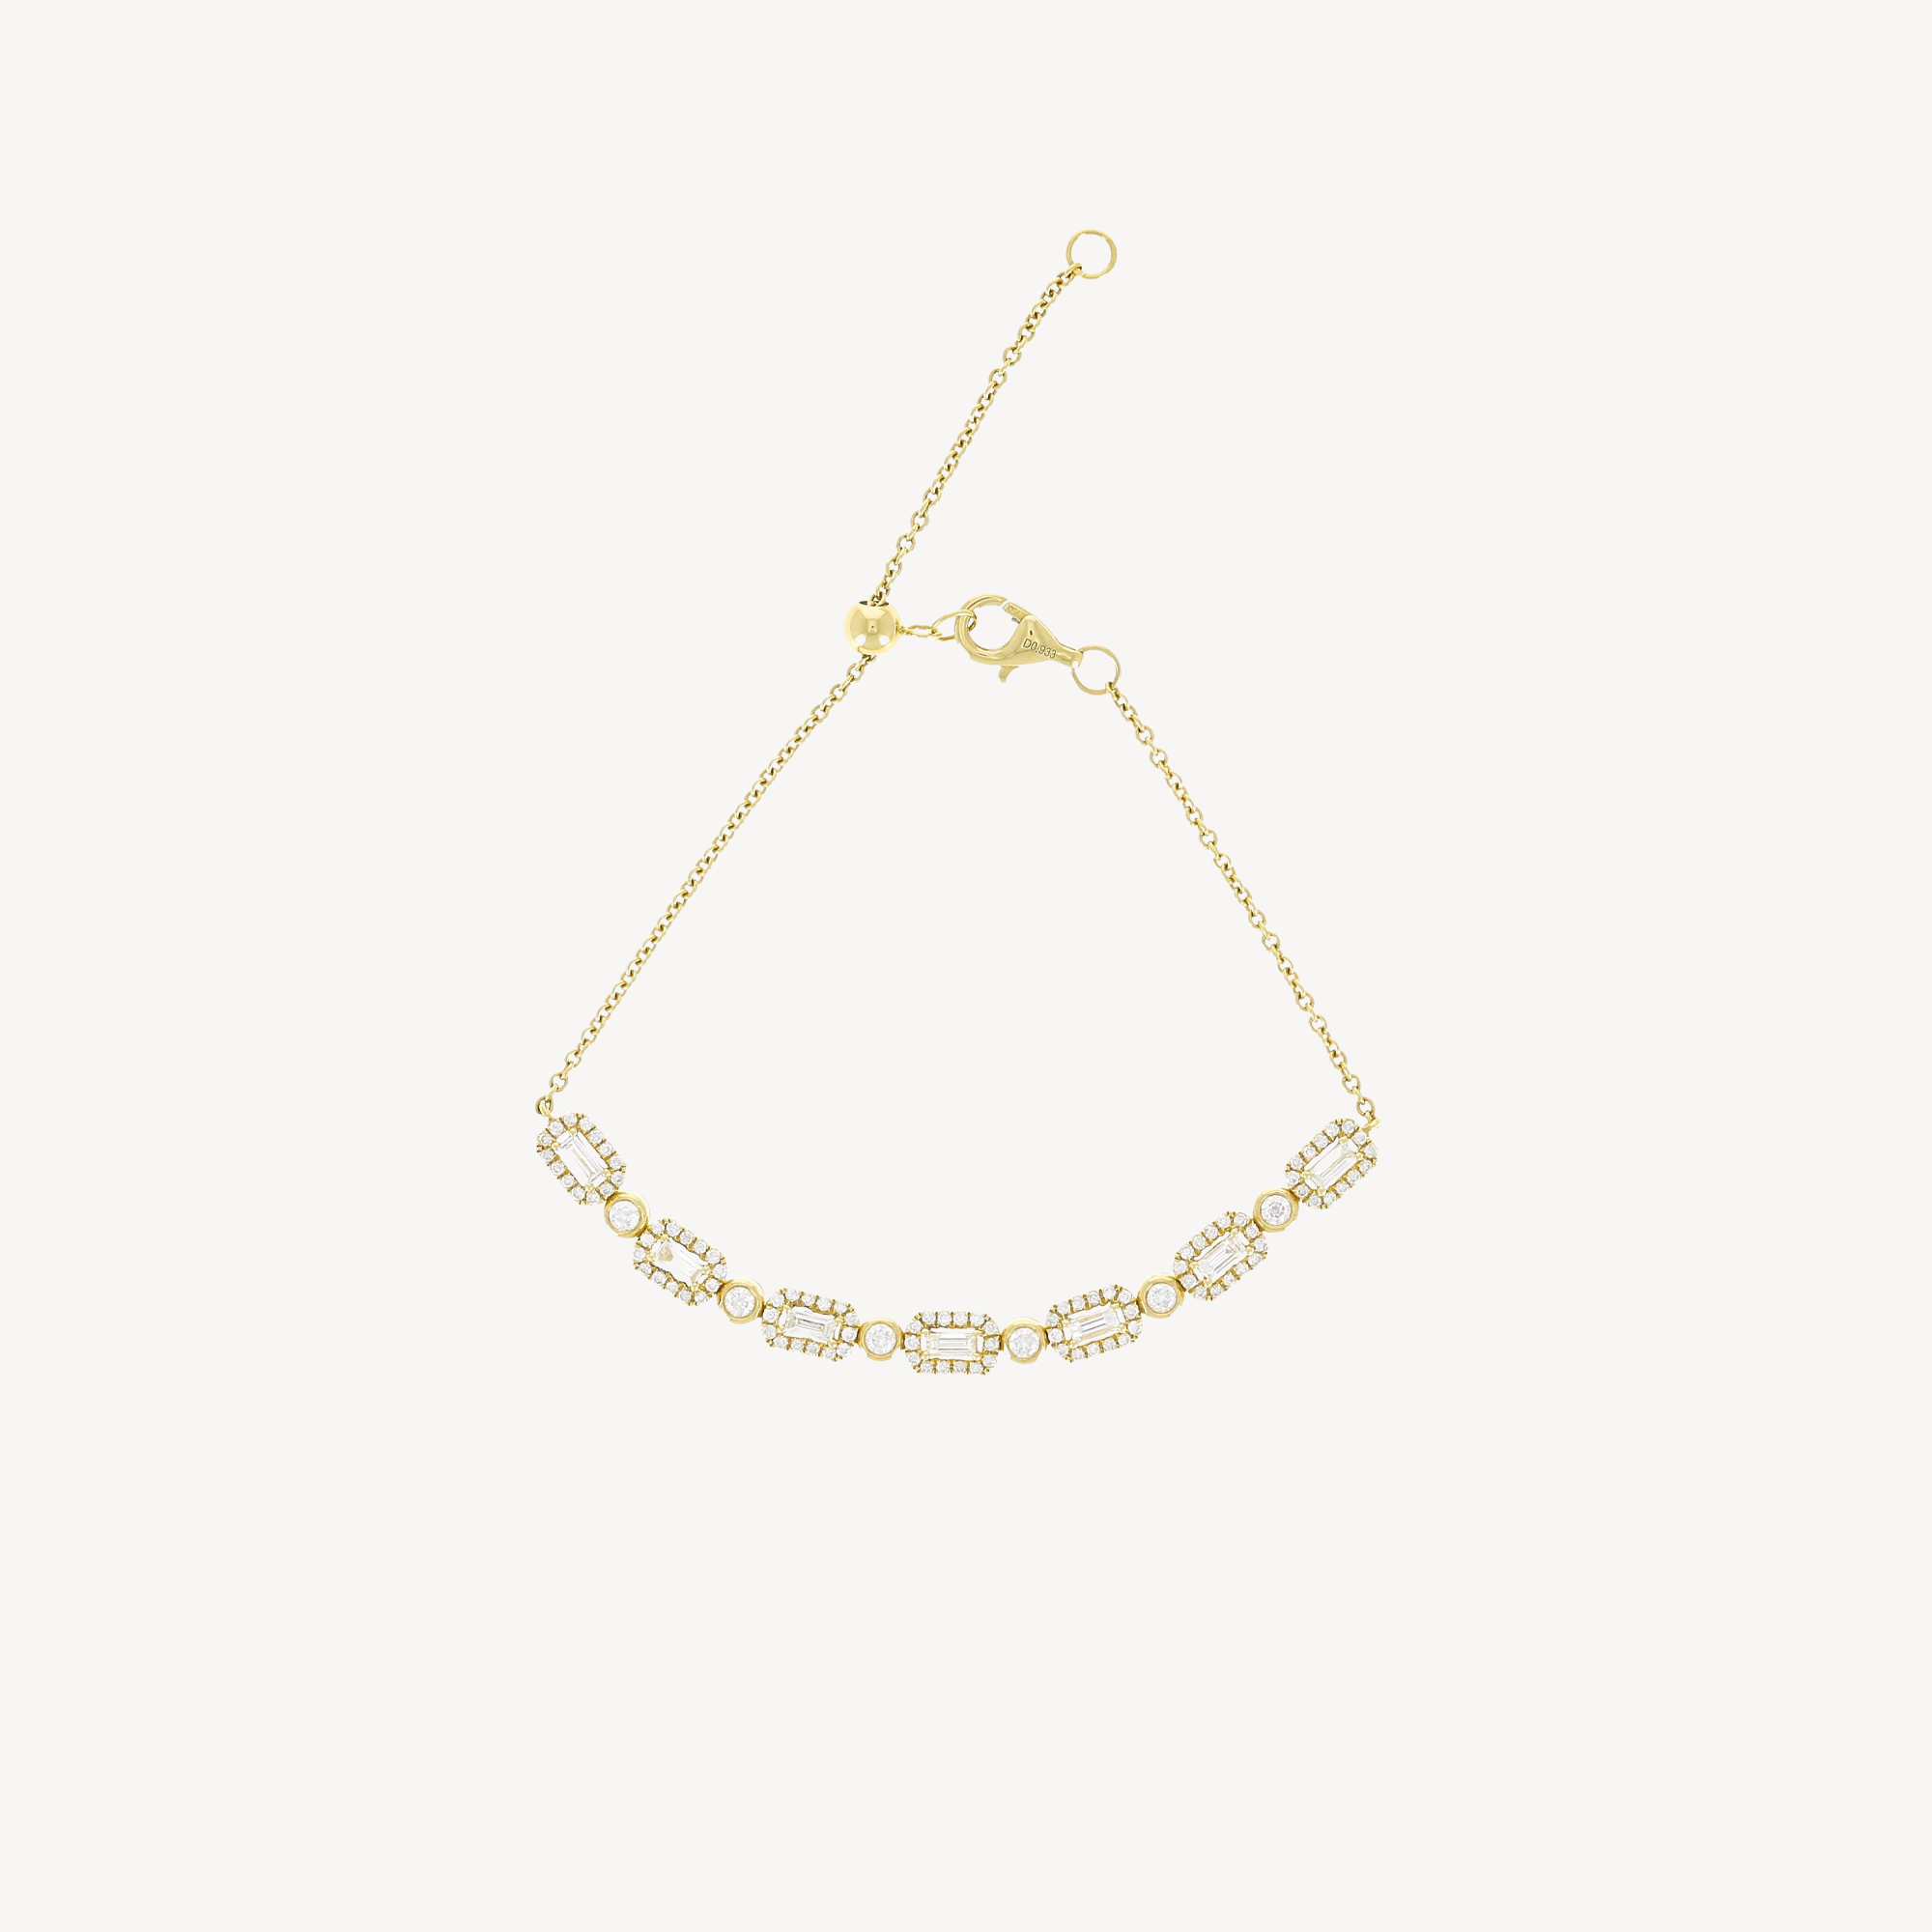 Ajustable Chain with 5 Links Bracelet